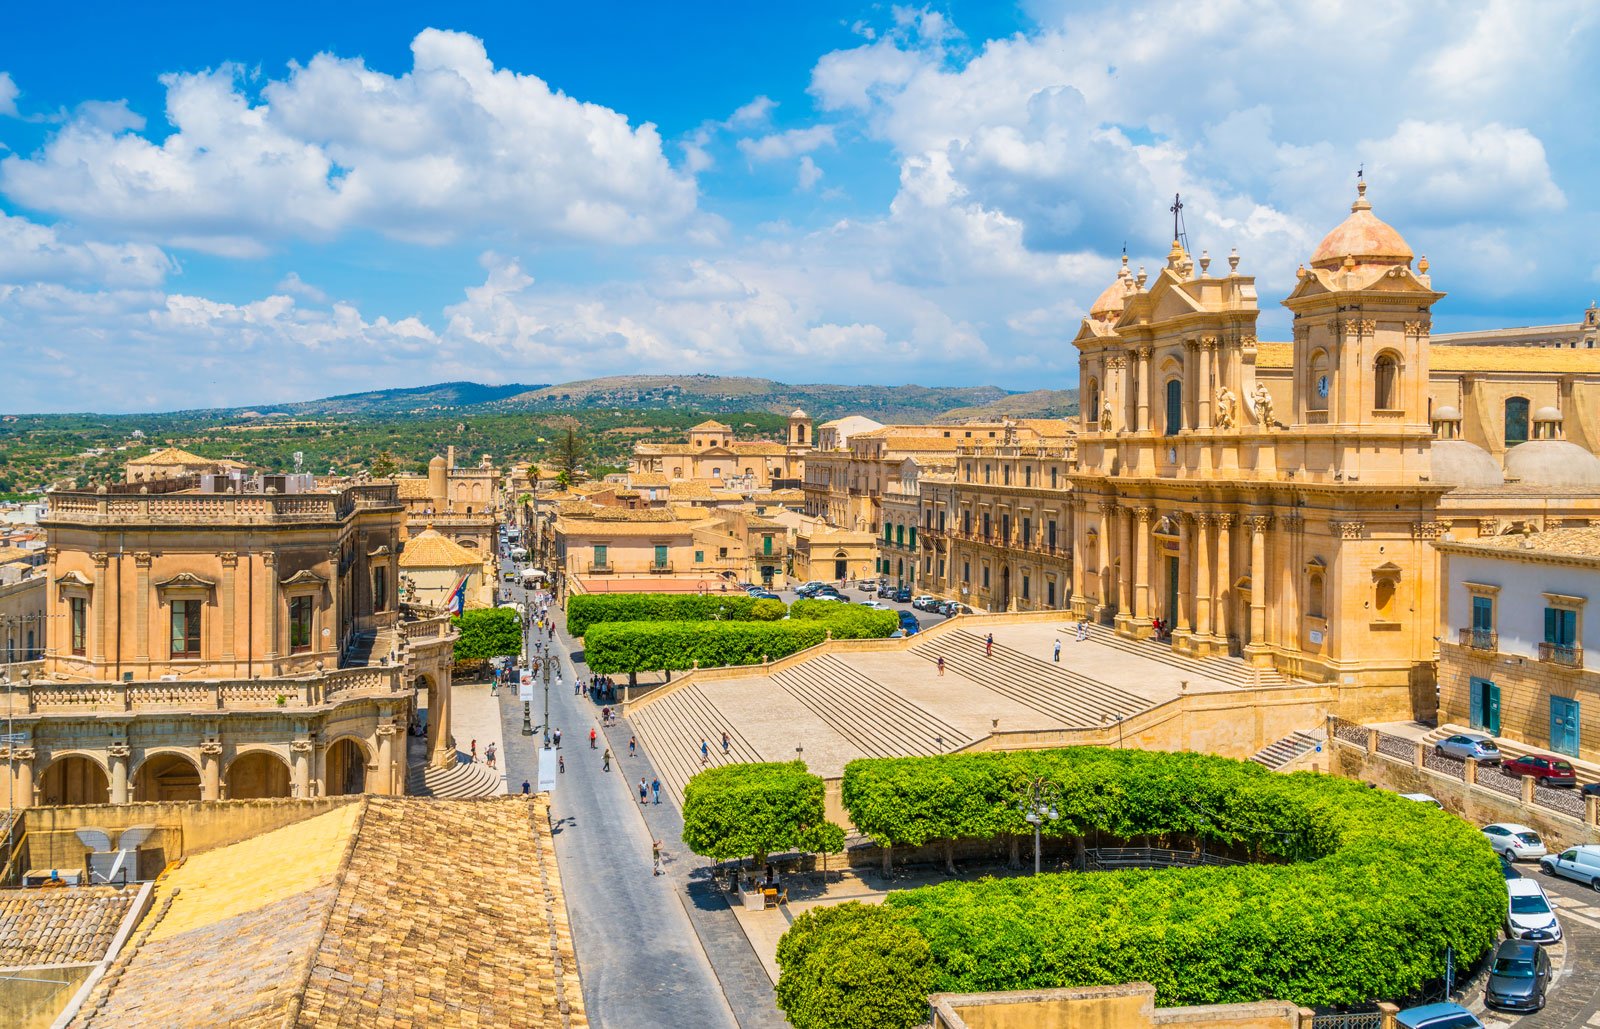 Elegant Noto, entirely rebuilt in the baroque style after an earthquake